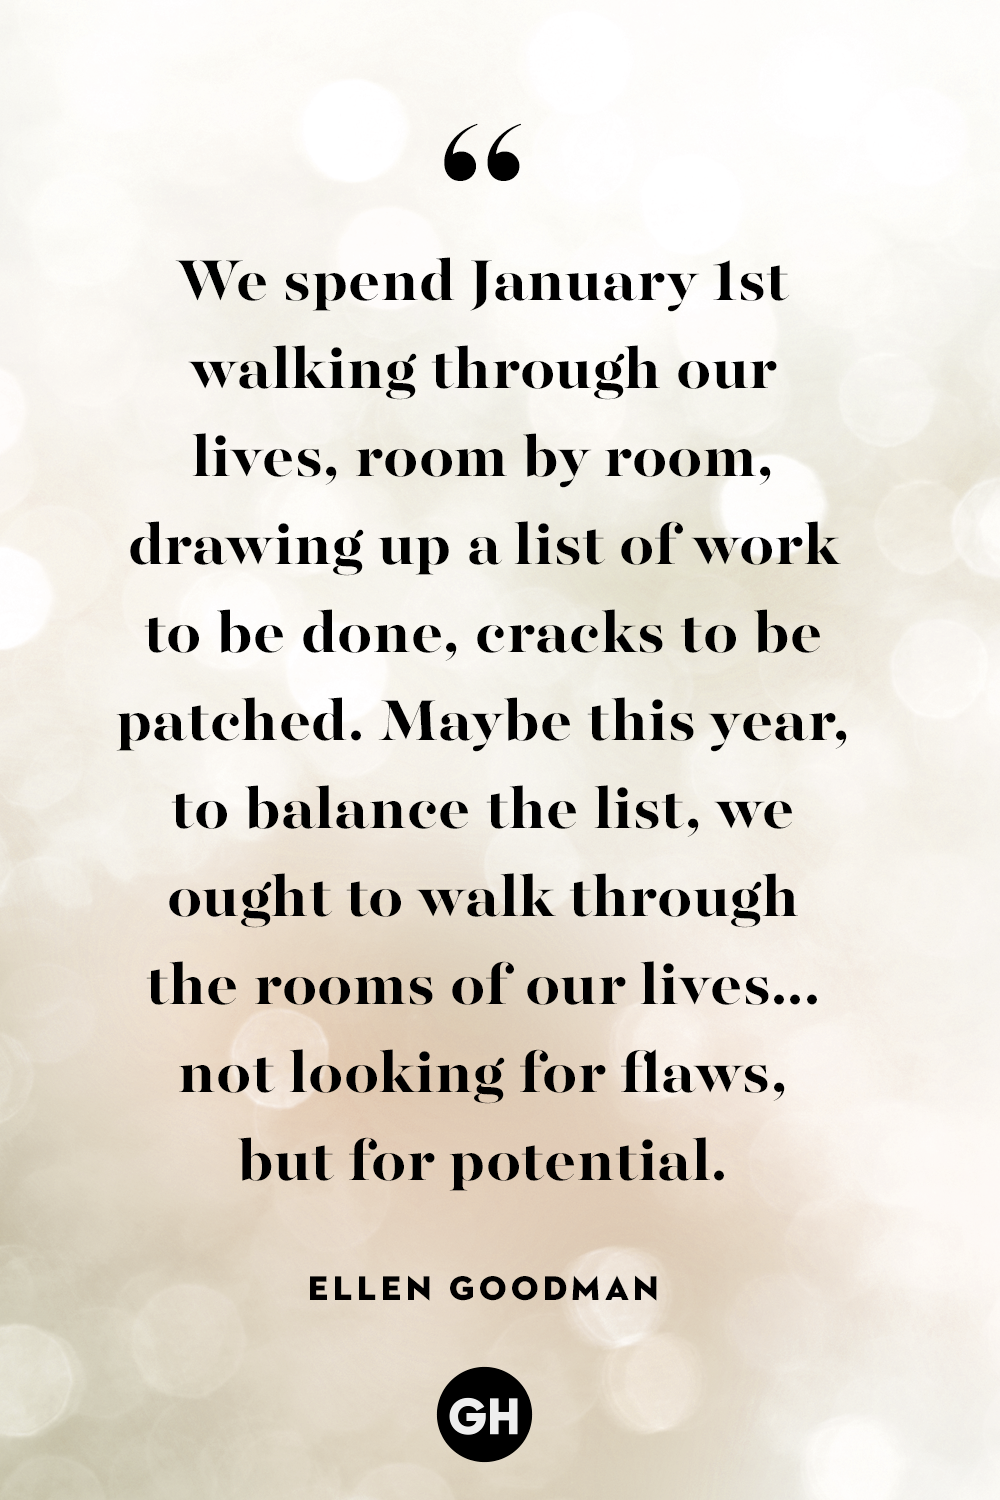 65 Best New Year Quotes 2021 Inspiring Nye End Of Year Sayings Happy new year messages for friends and family, funny new year wishes, new year images, quotes, sms, texts, & more. 65 best new year quotes 2021